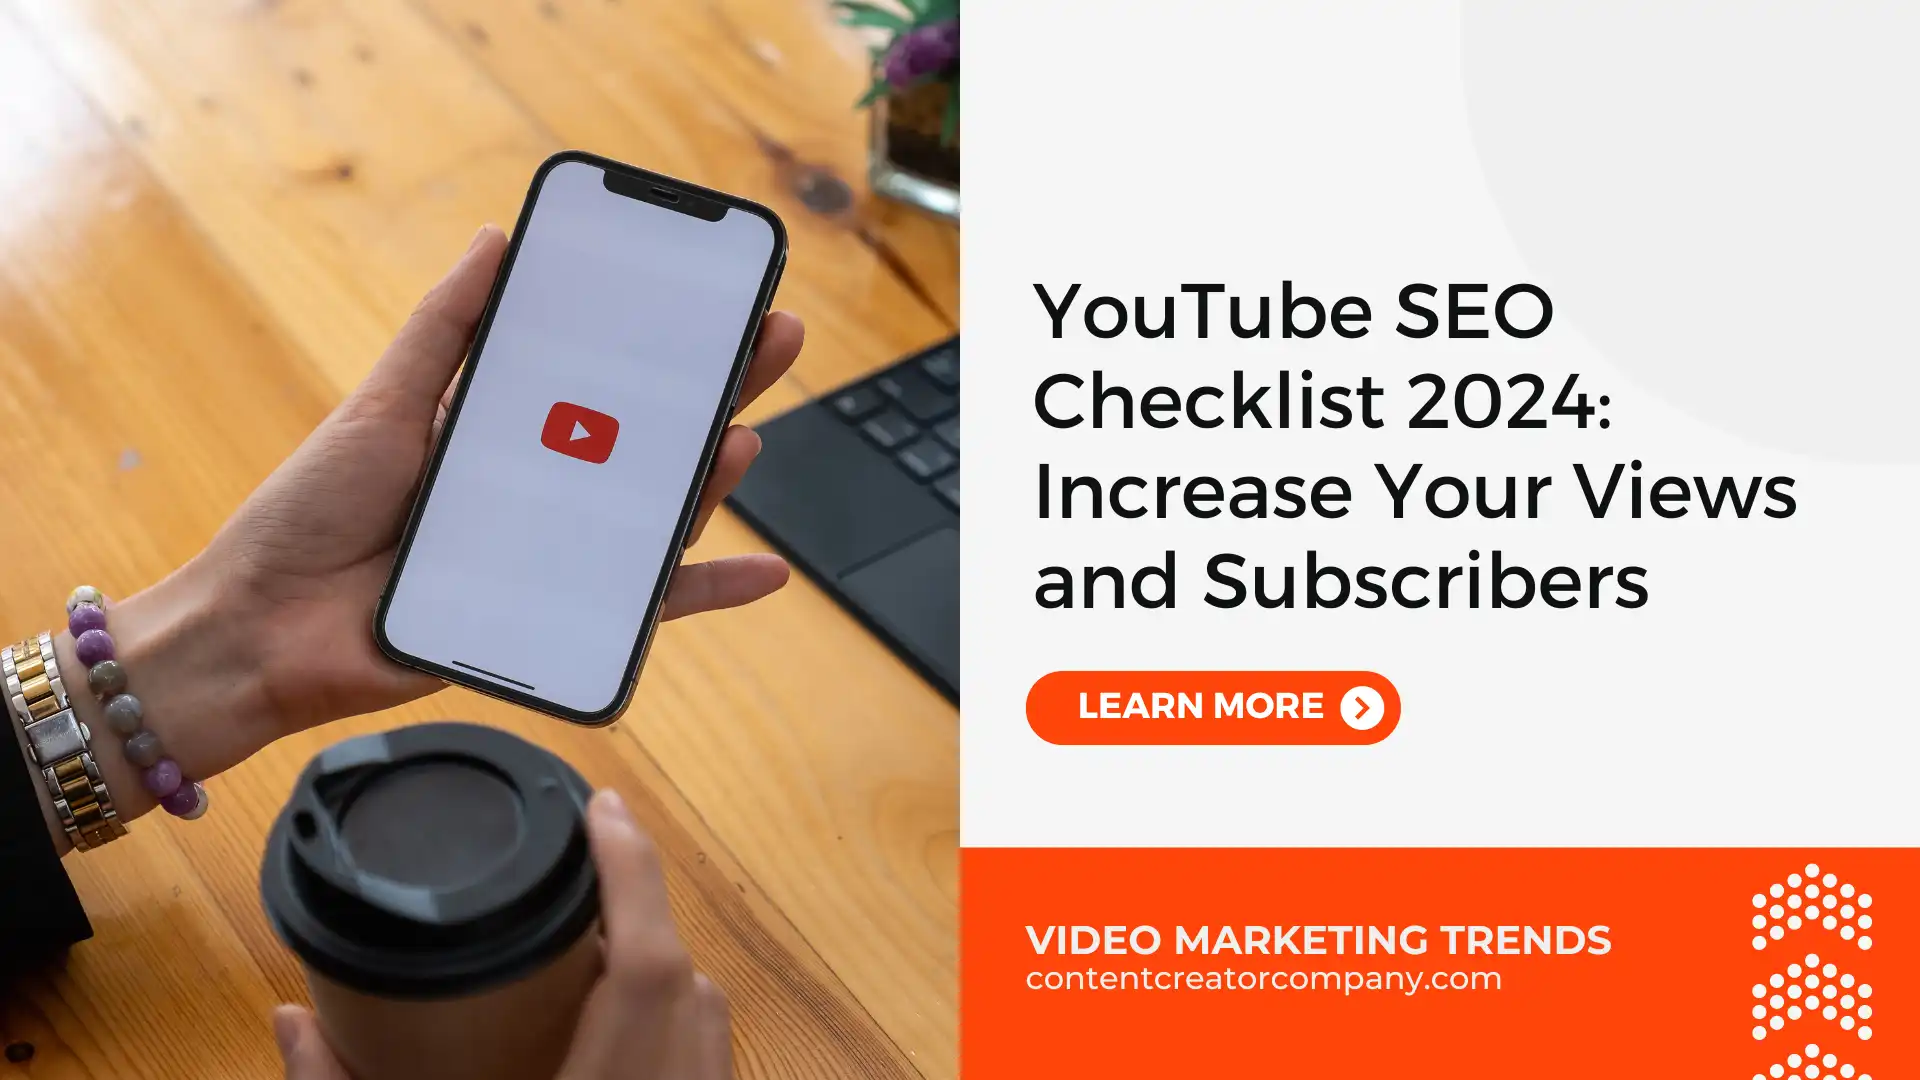 YouTube SEO Checklist 2024: Increase Your Views and Subscribers